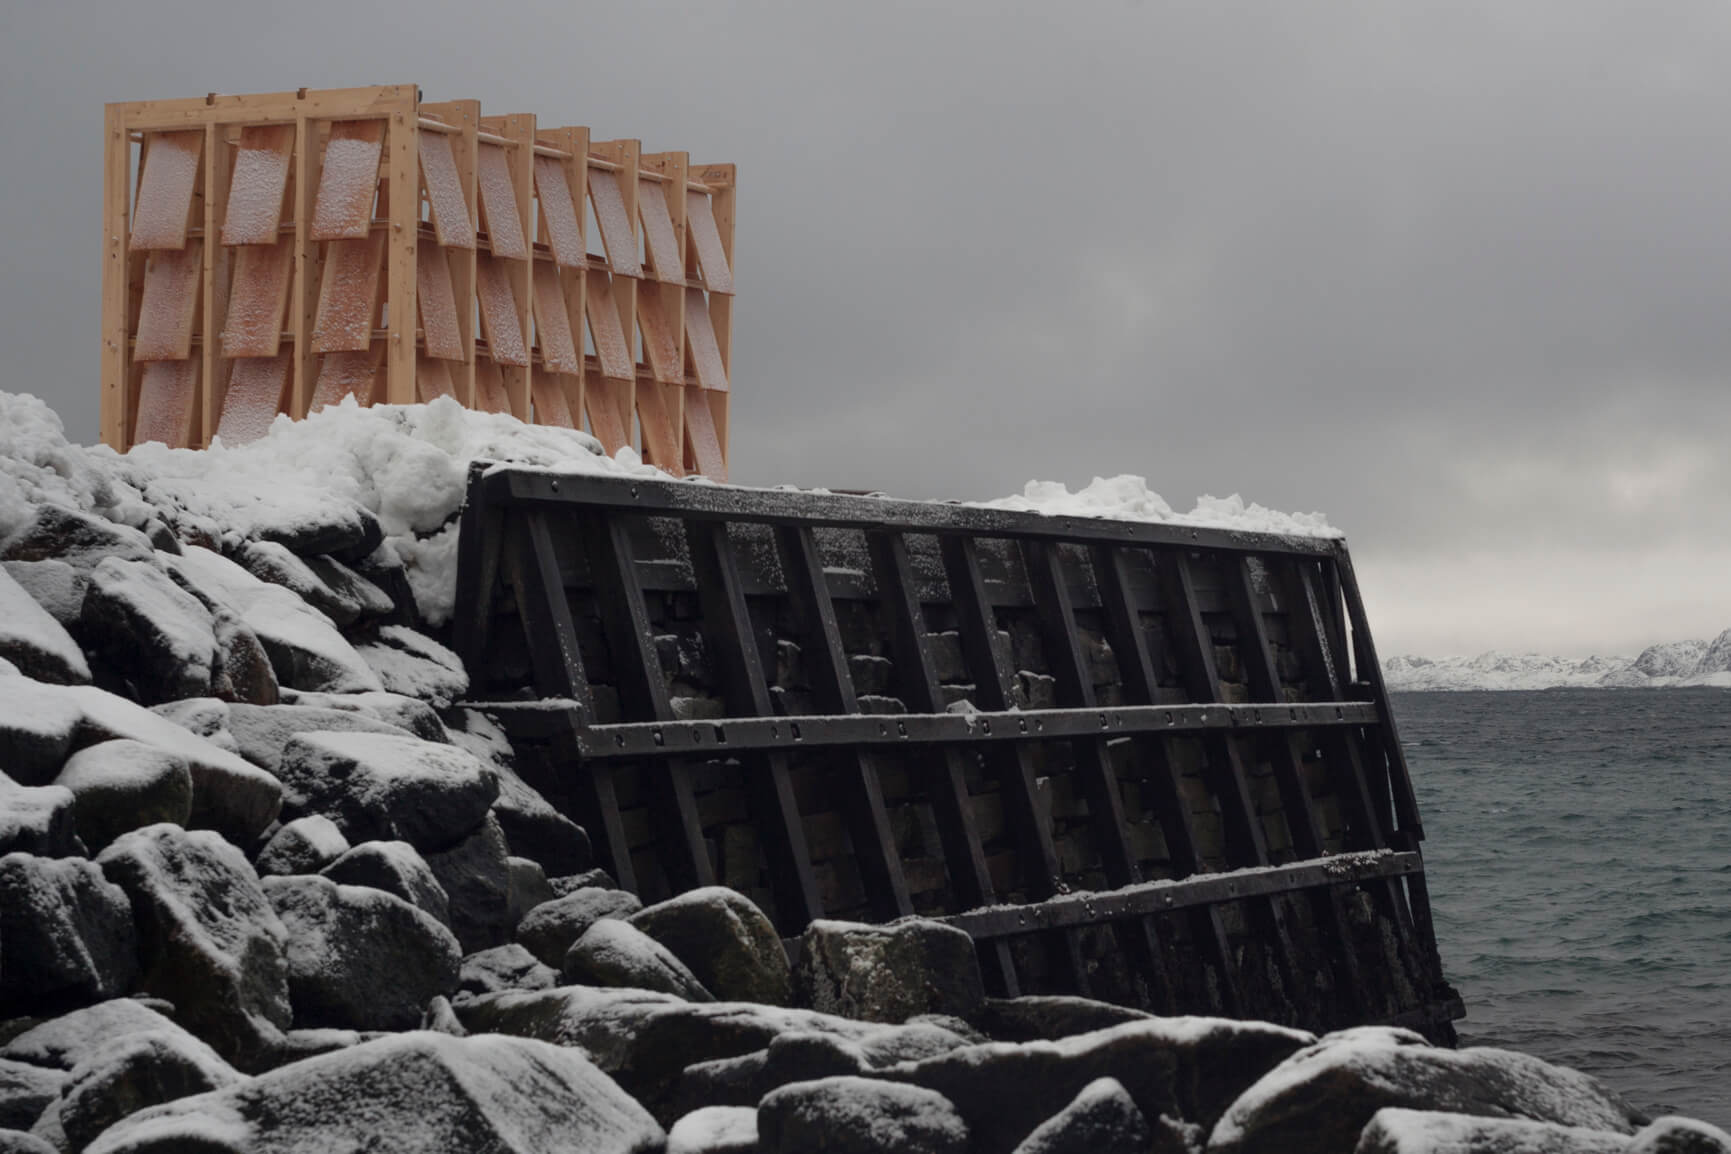 Sled House in position on a pier leading out to the North Atlantic Ocean in Greenland. A model of the Sled House, designed by architect Konstantin Ikonomidis for the Nuuk Nordisk 2019 festival in Greenland. The design is atop an actual sled created from wood and a structure with posts and slats only put together by rope and pegs fitting in holes.